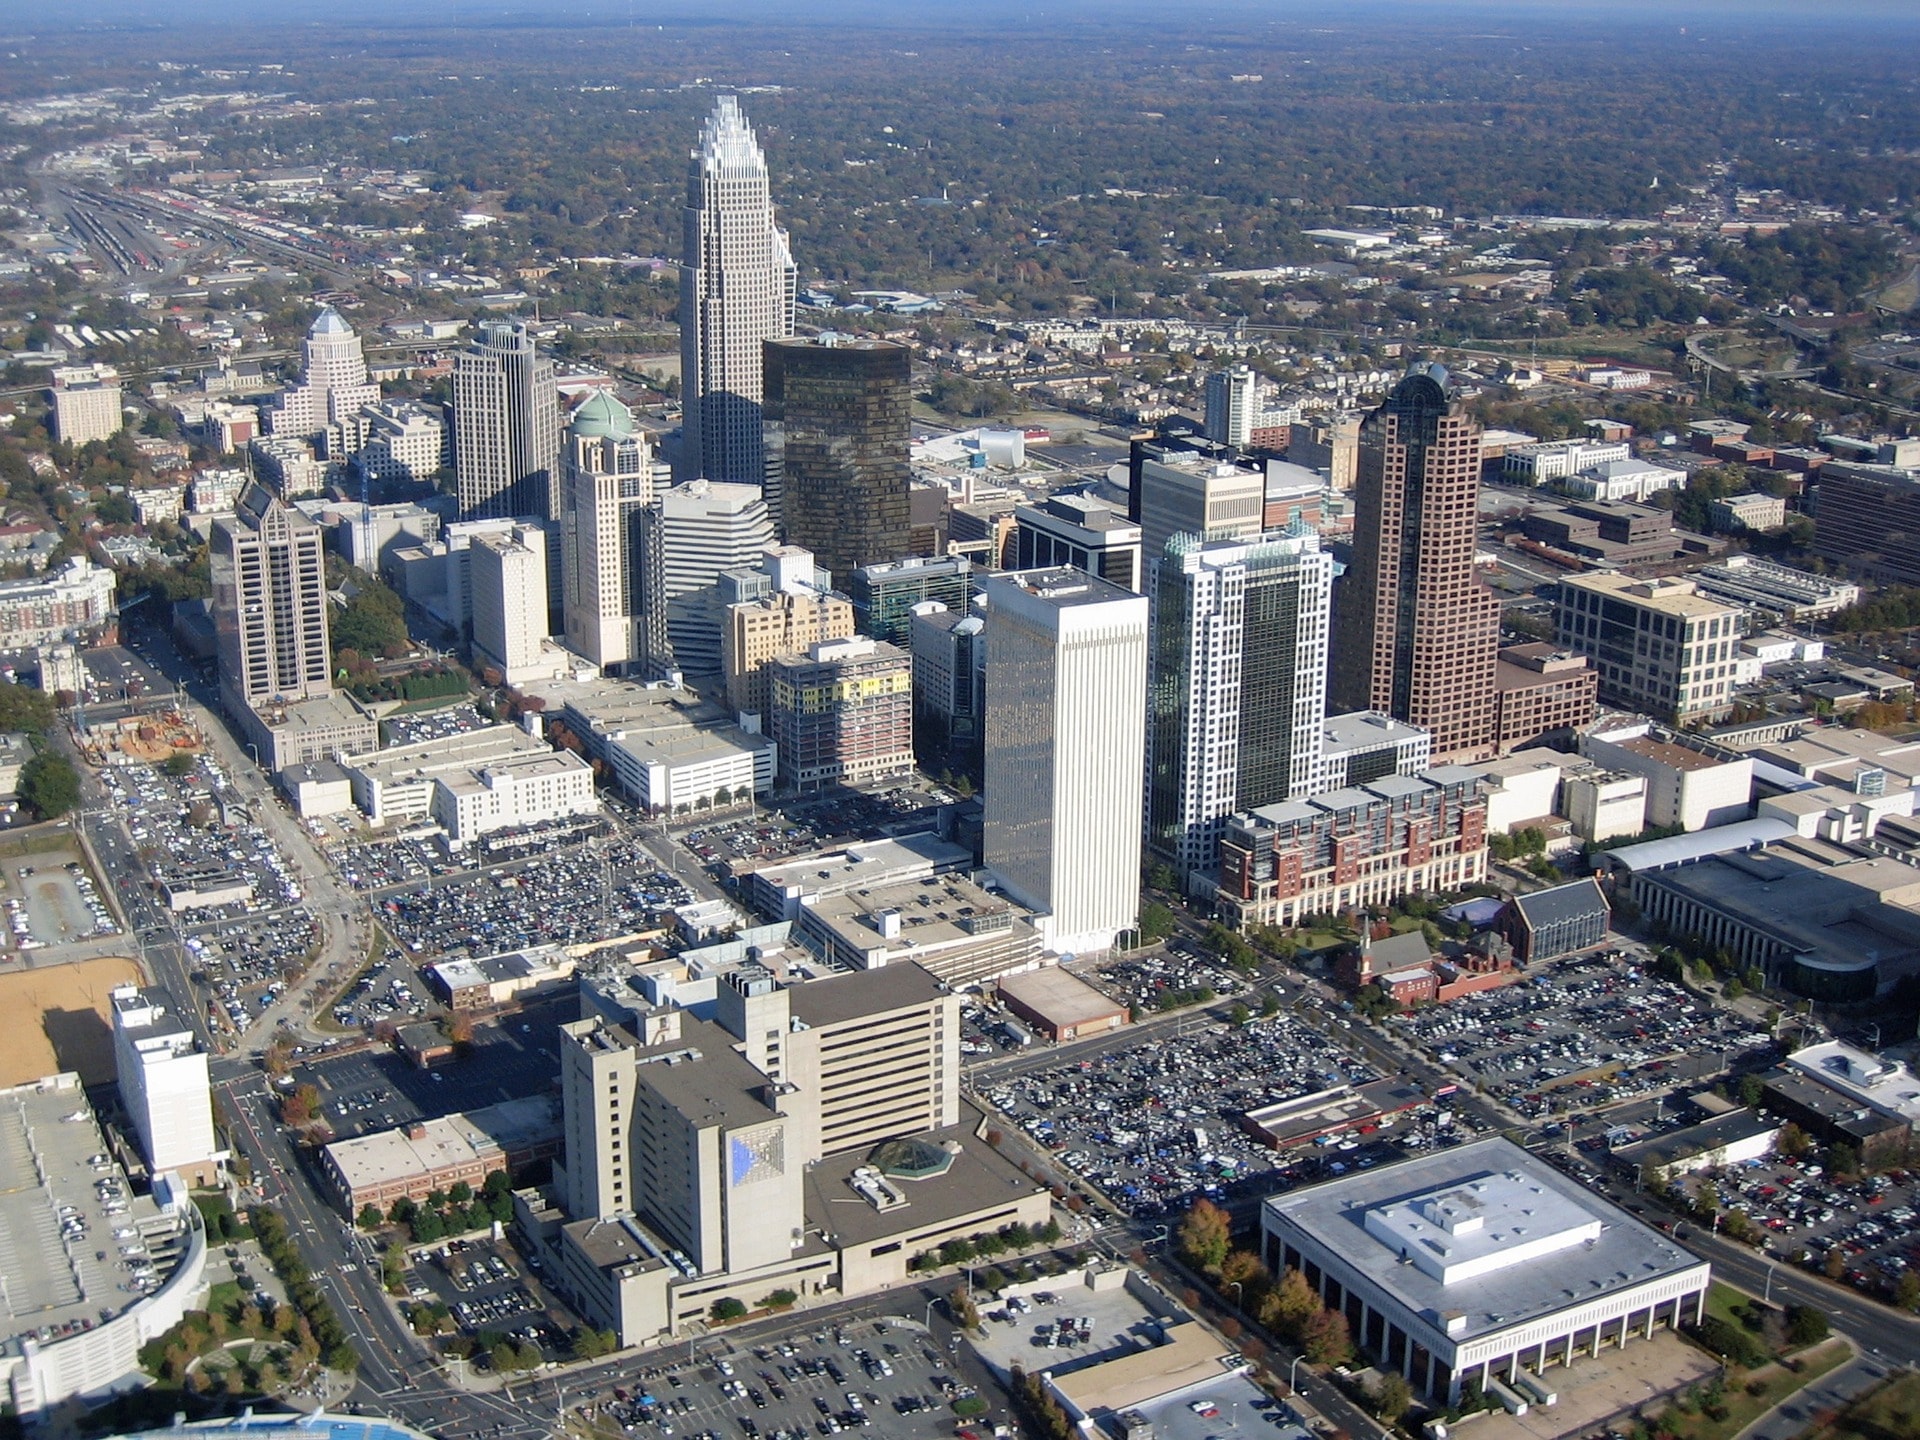 Aerial view of the state, North Carolina